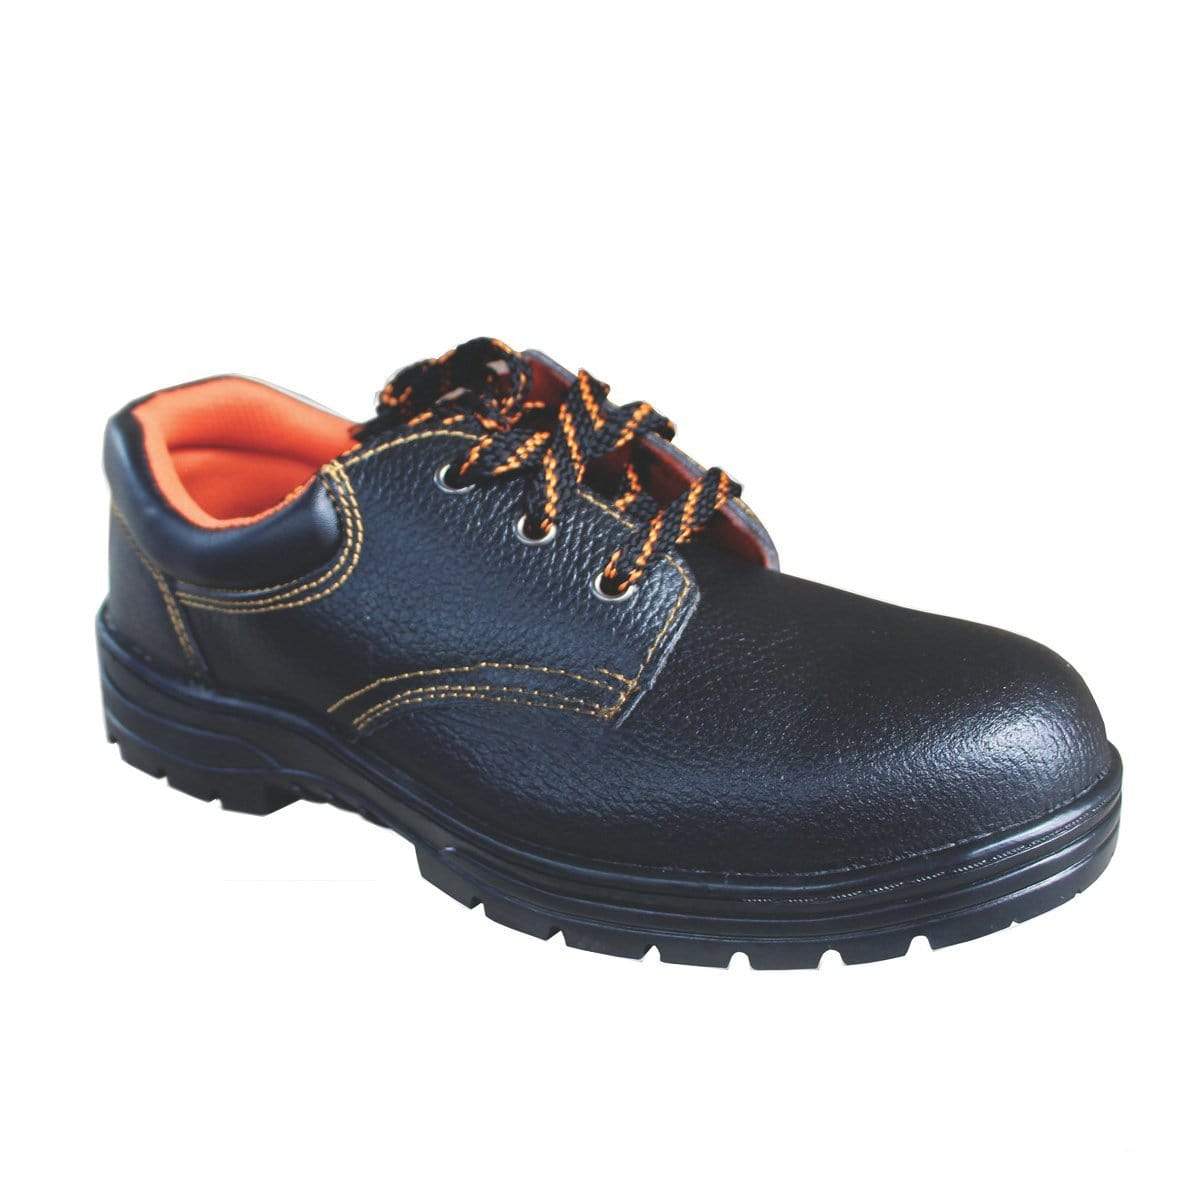 ANEKA Worker Safety Shoes Safety Boots 